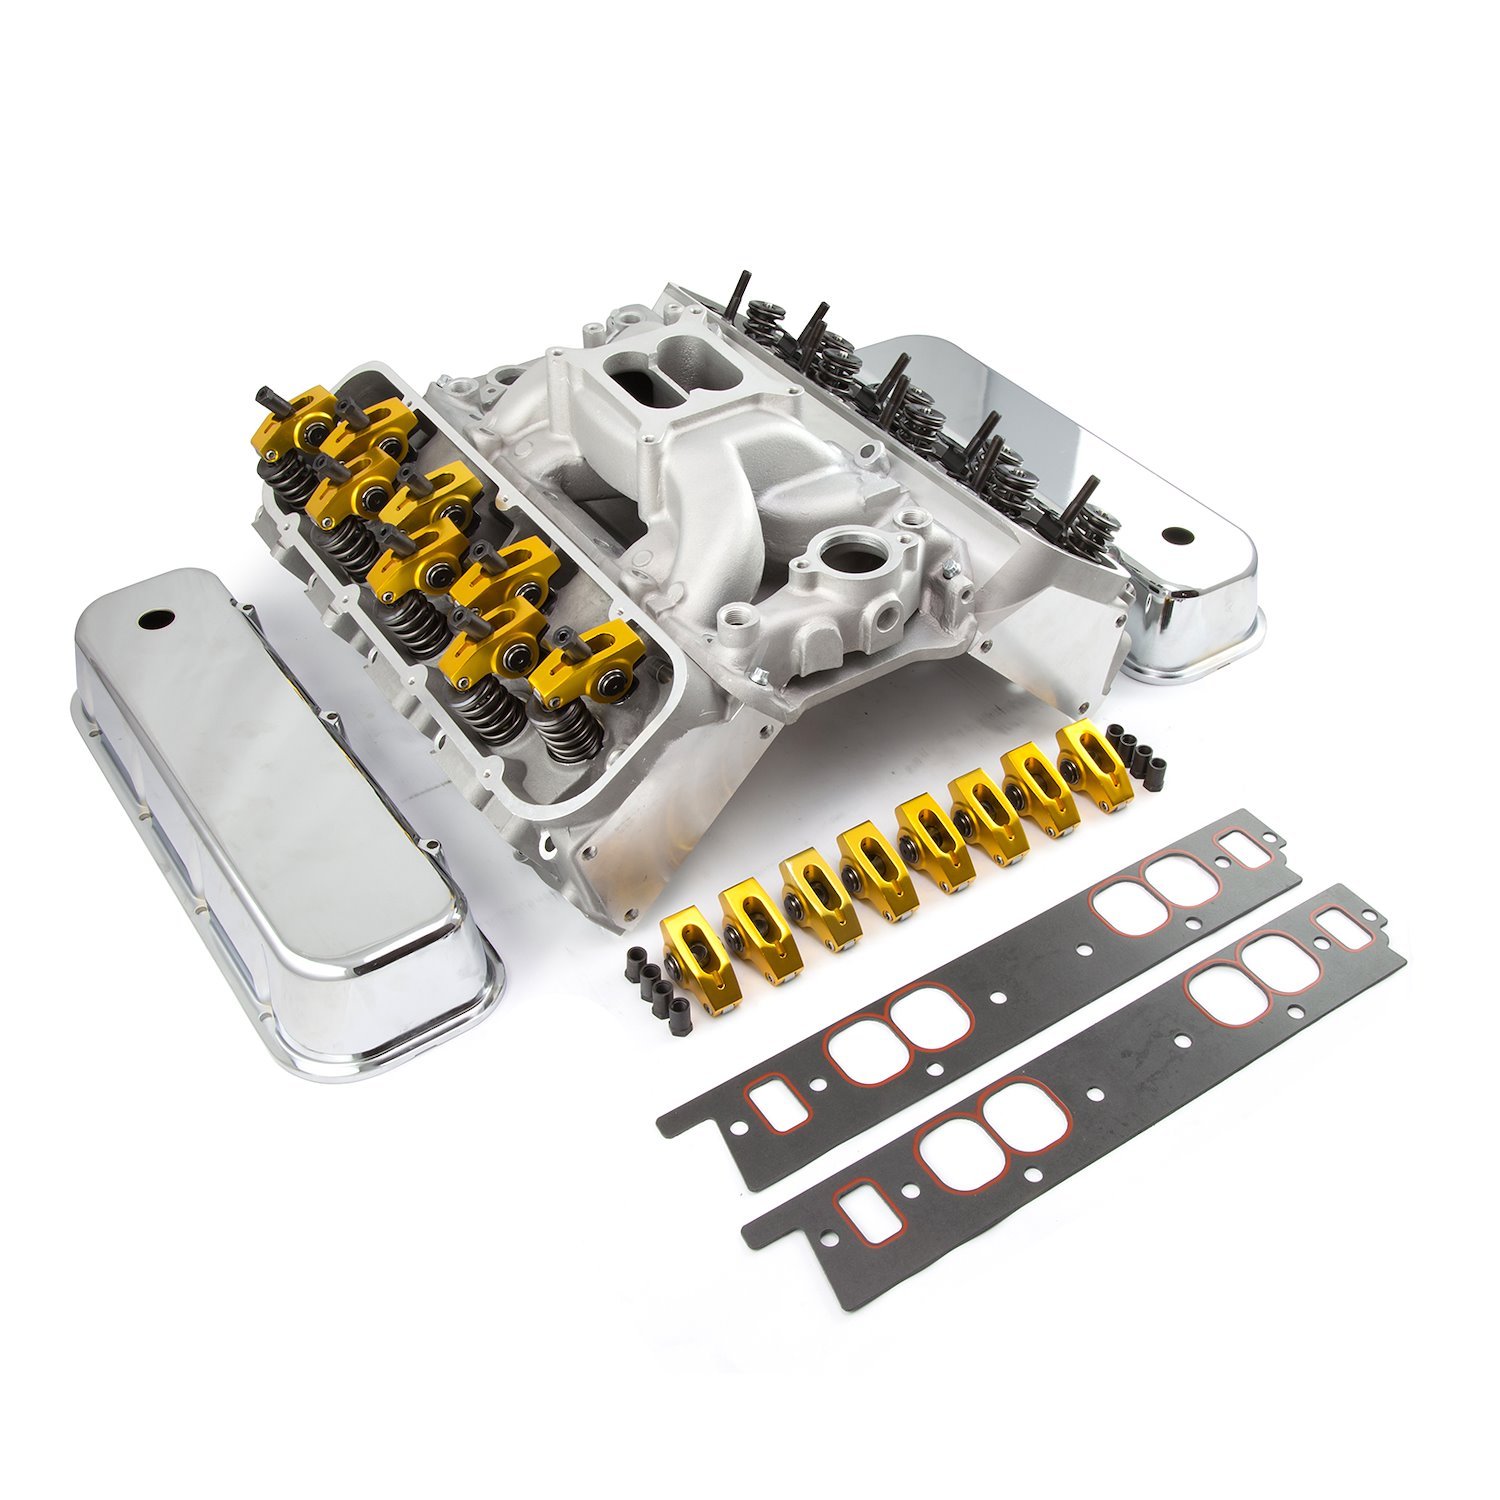 Chevy BBC 396 Hydraulic Roller Top End Engine Kit